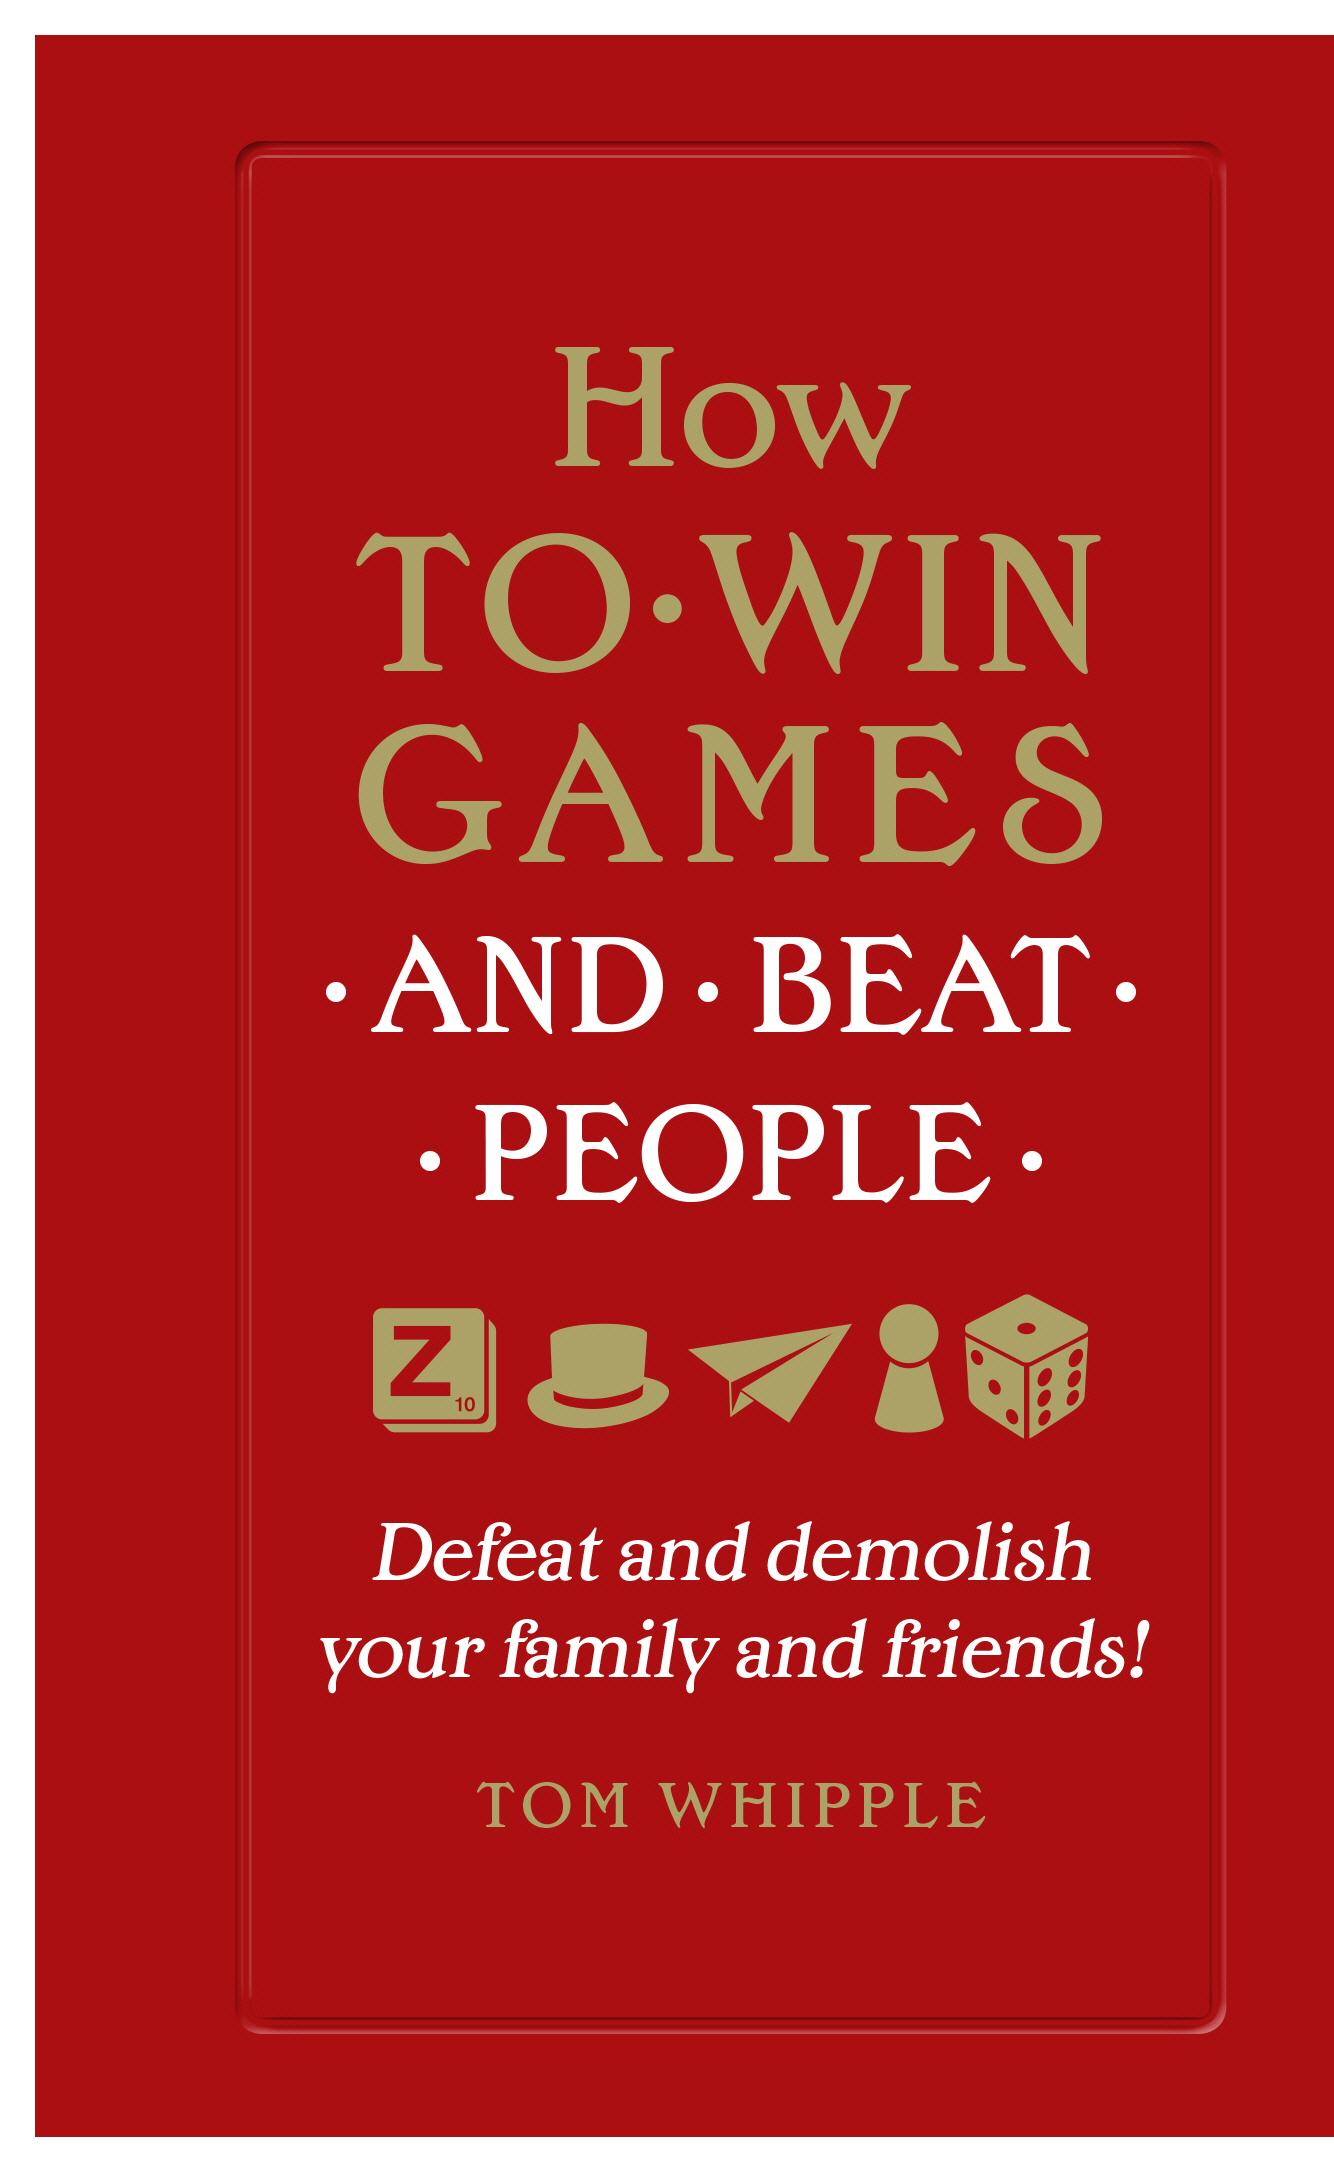 How to win games and beat people - Tom Whipple